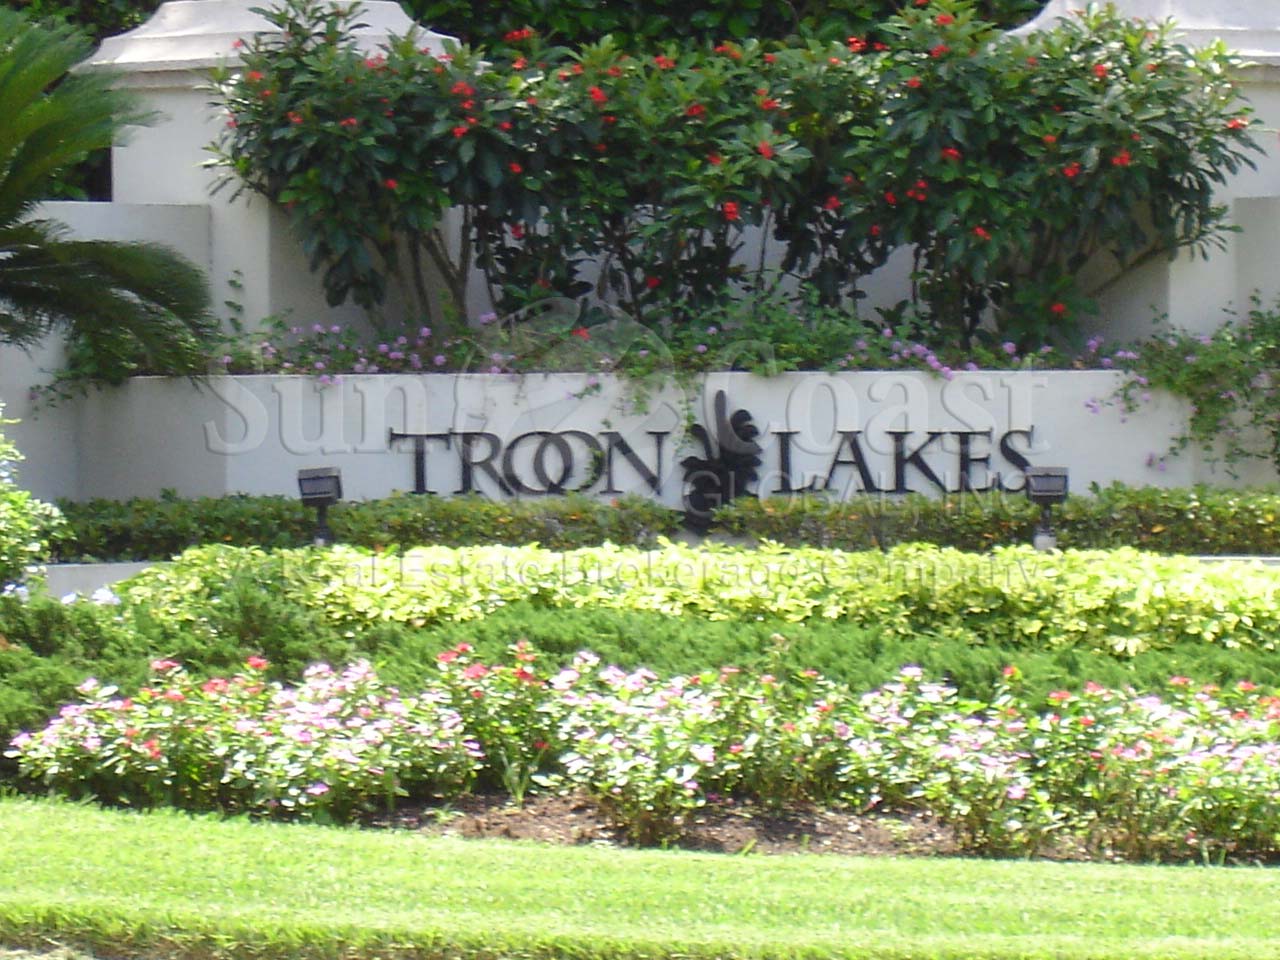 Troon Lakes sign